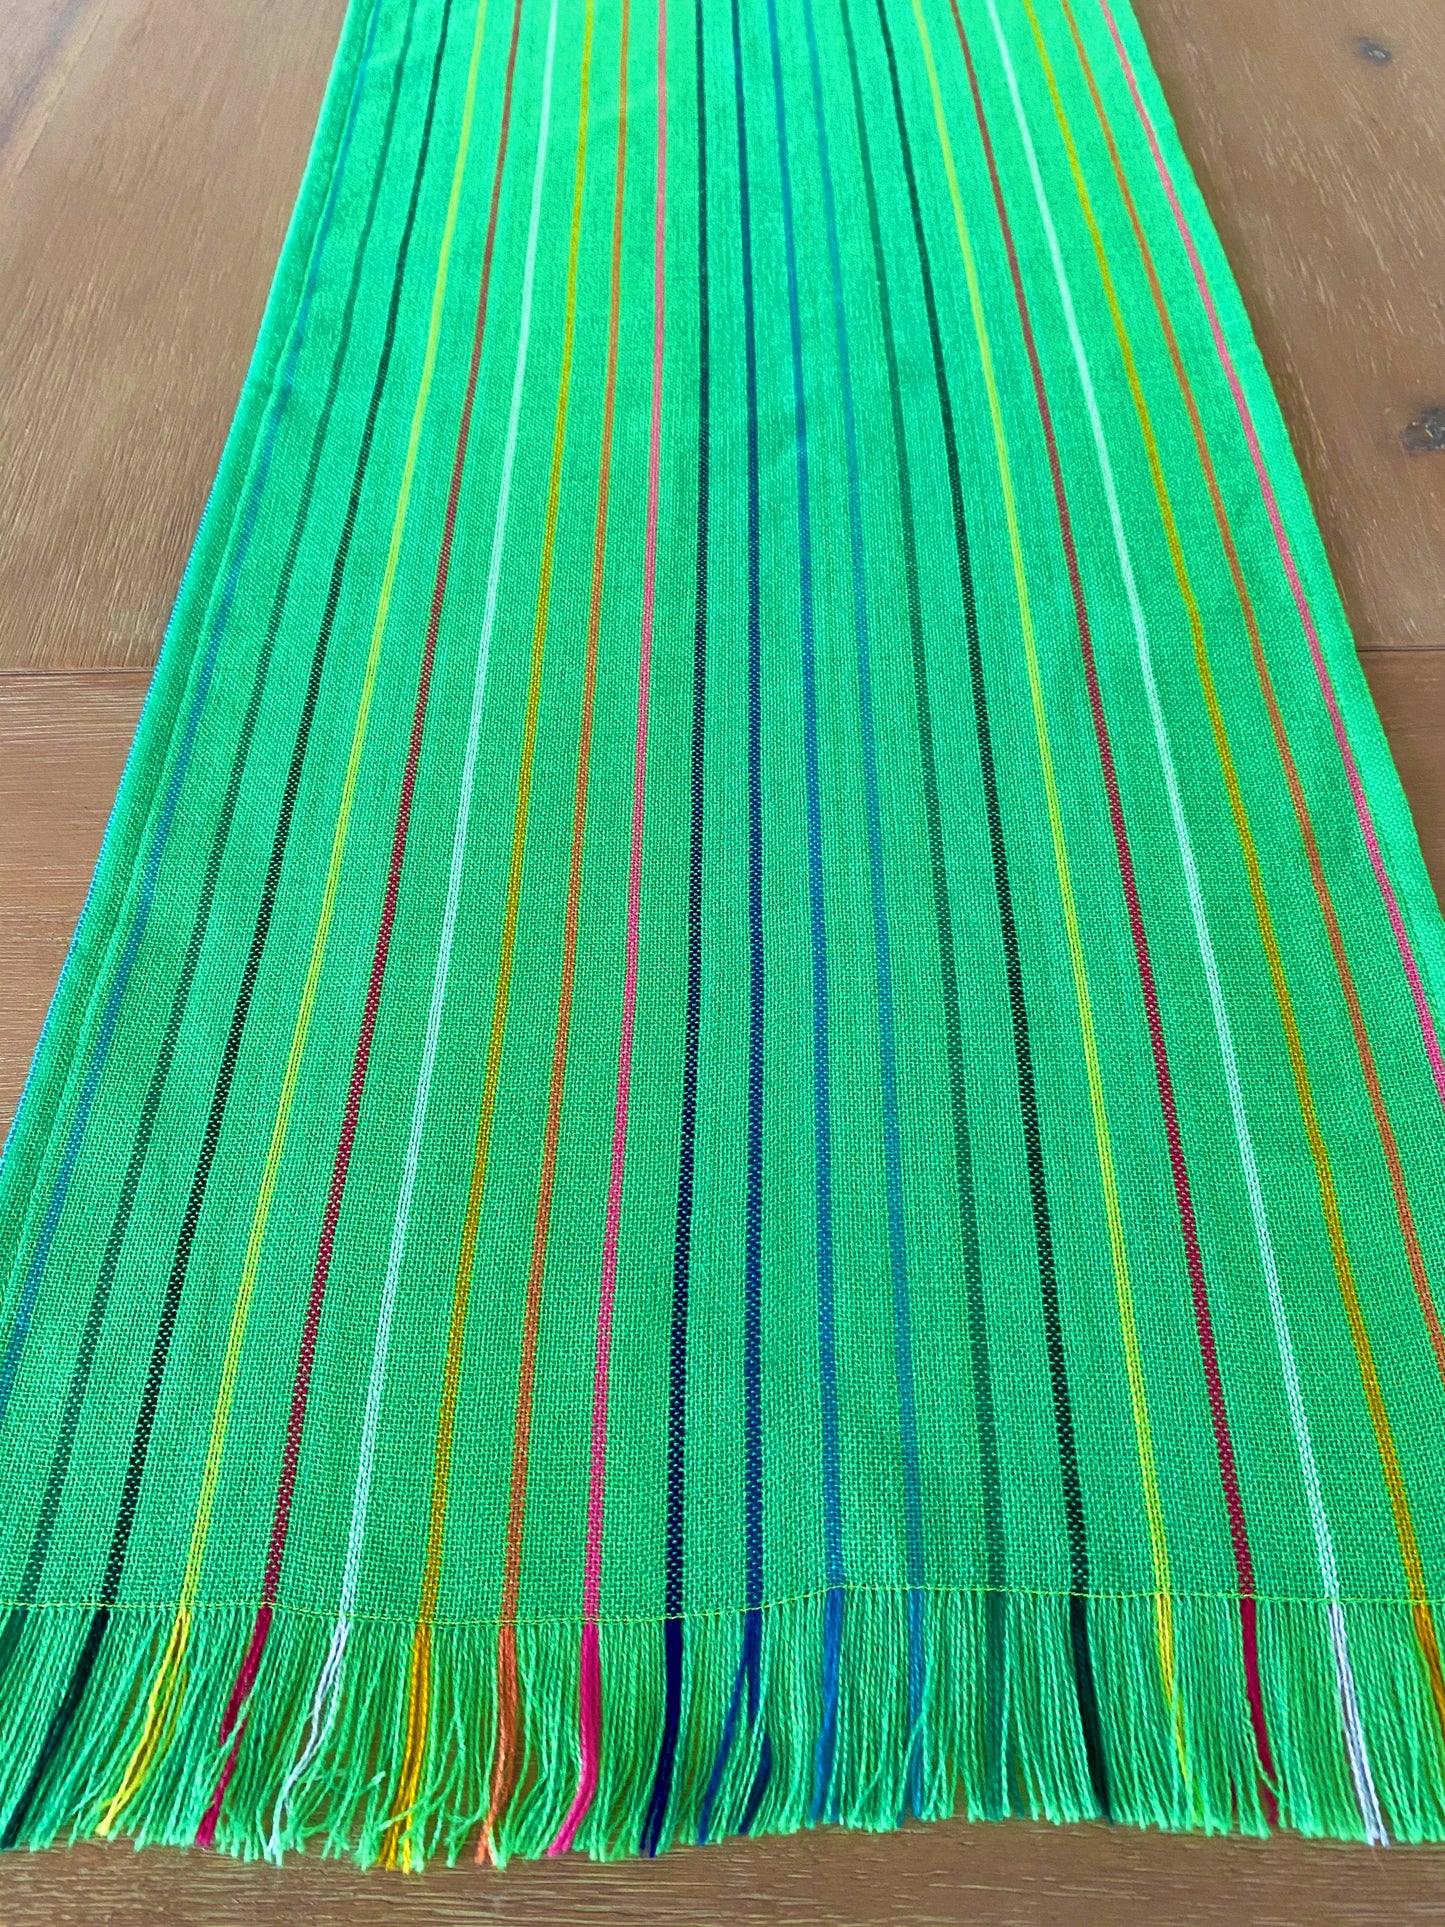 Fiesta decorations Table Runner- Lime green striped